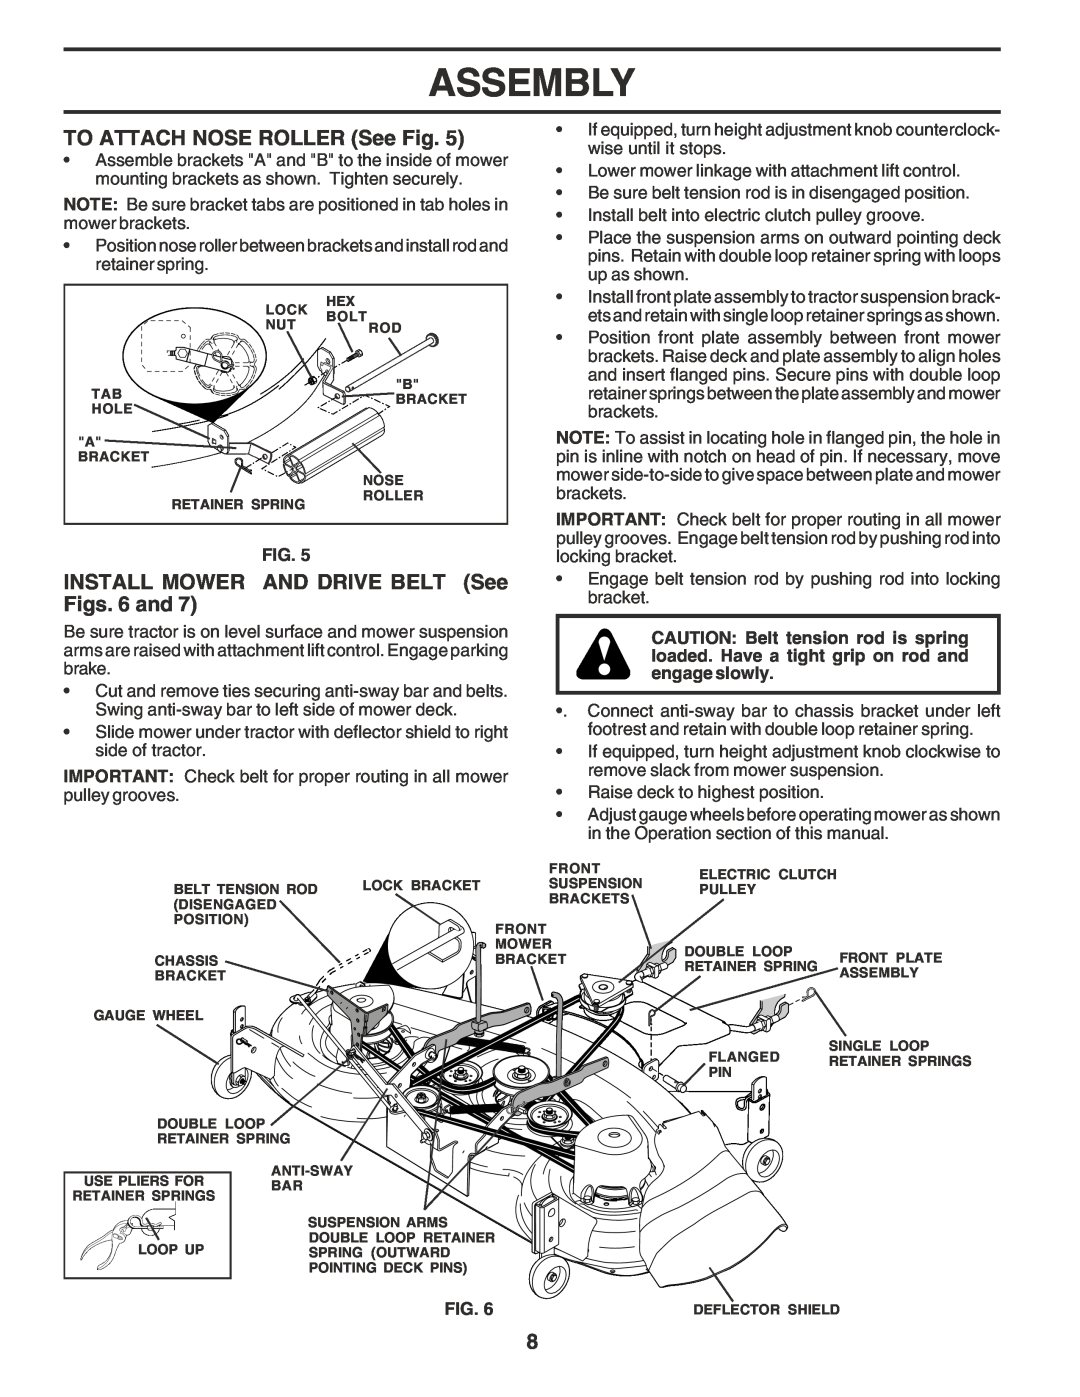 Poulan 180278 owner manual TO ATTACH NOSE ROLLER See Fig, INSTALL MOWER AND DRIVE BELT See Figs. 6 and, Assembly 